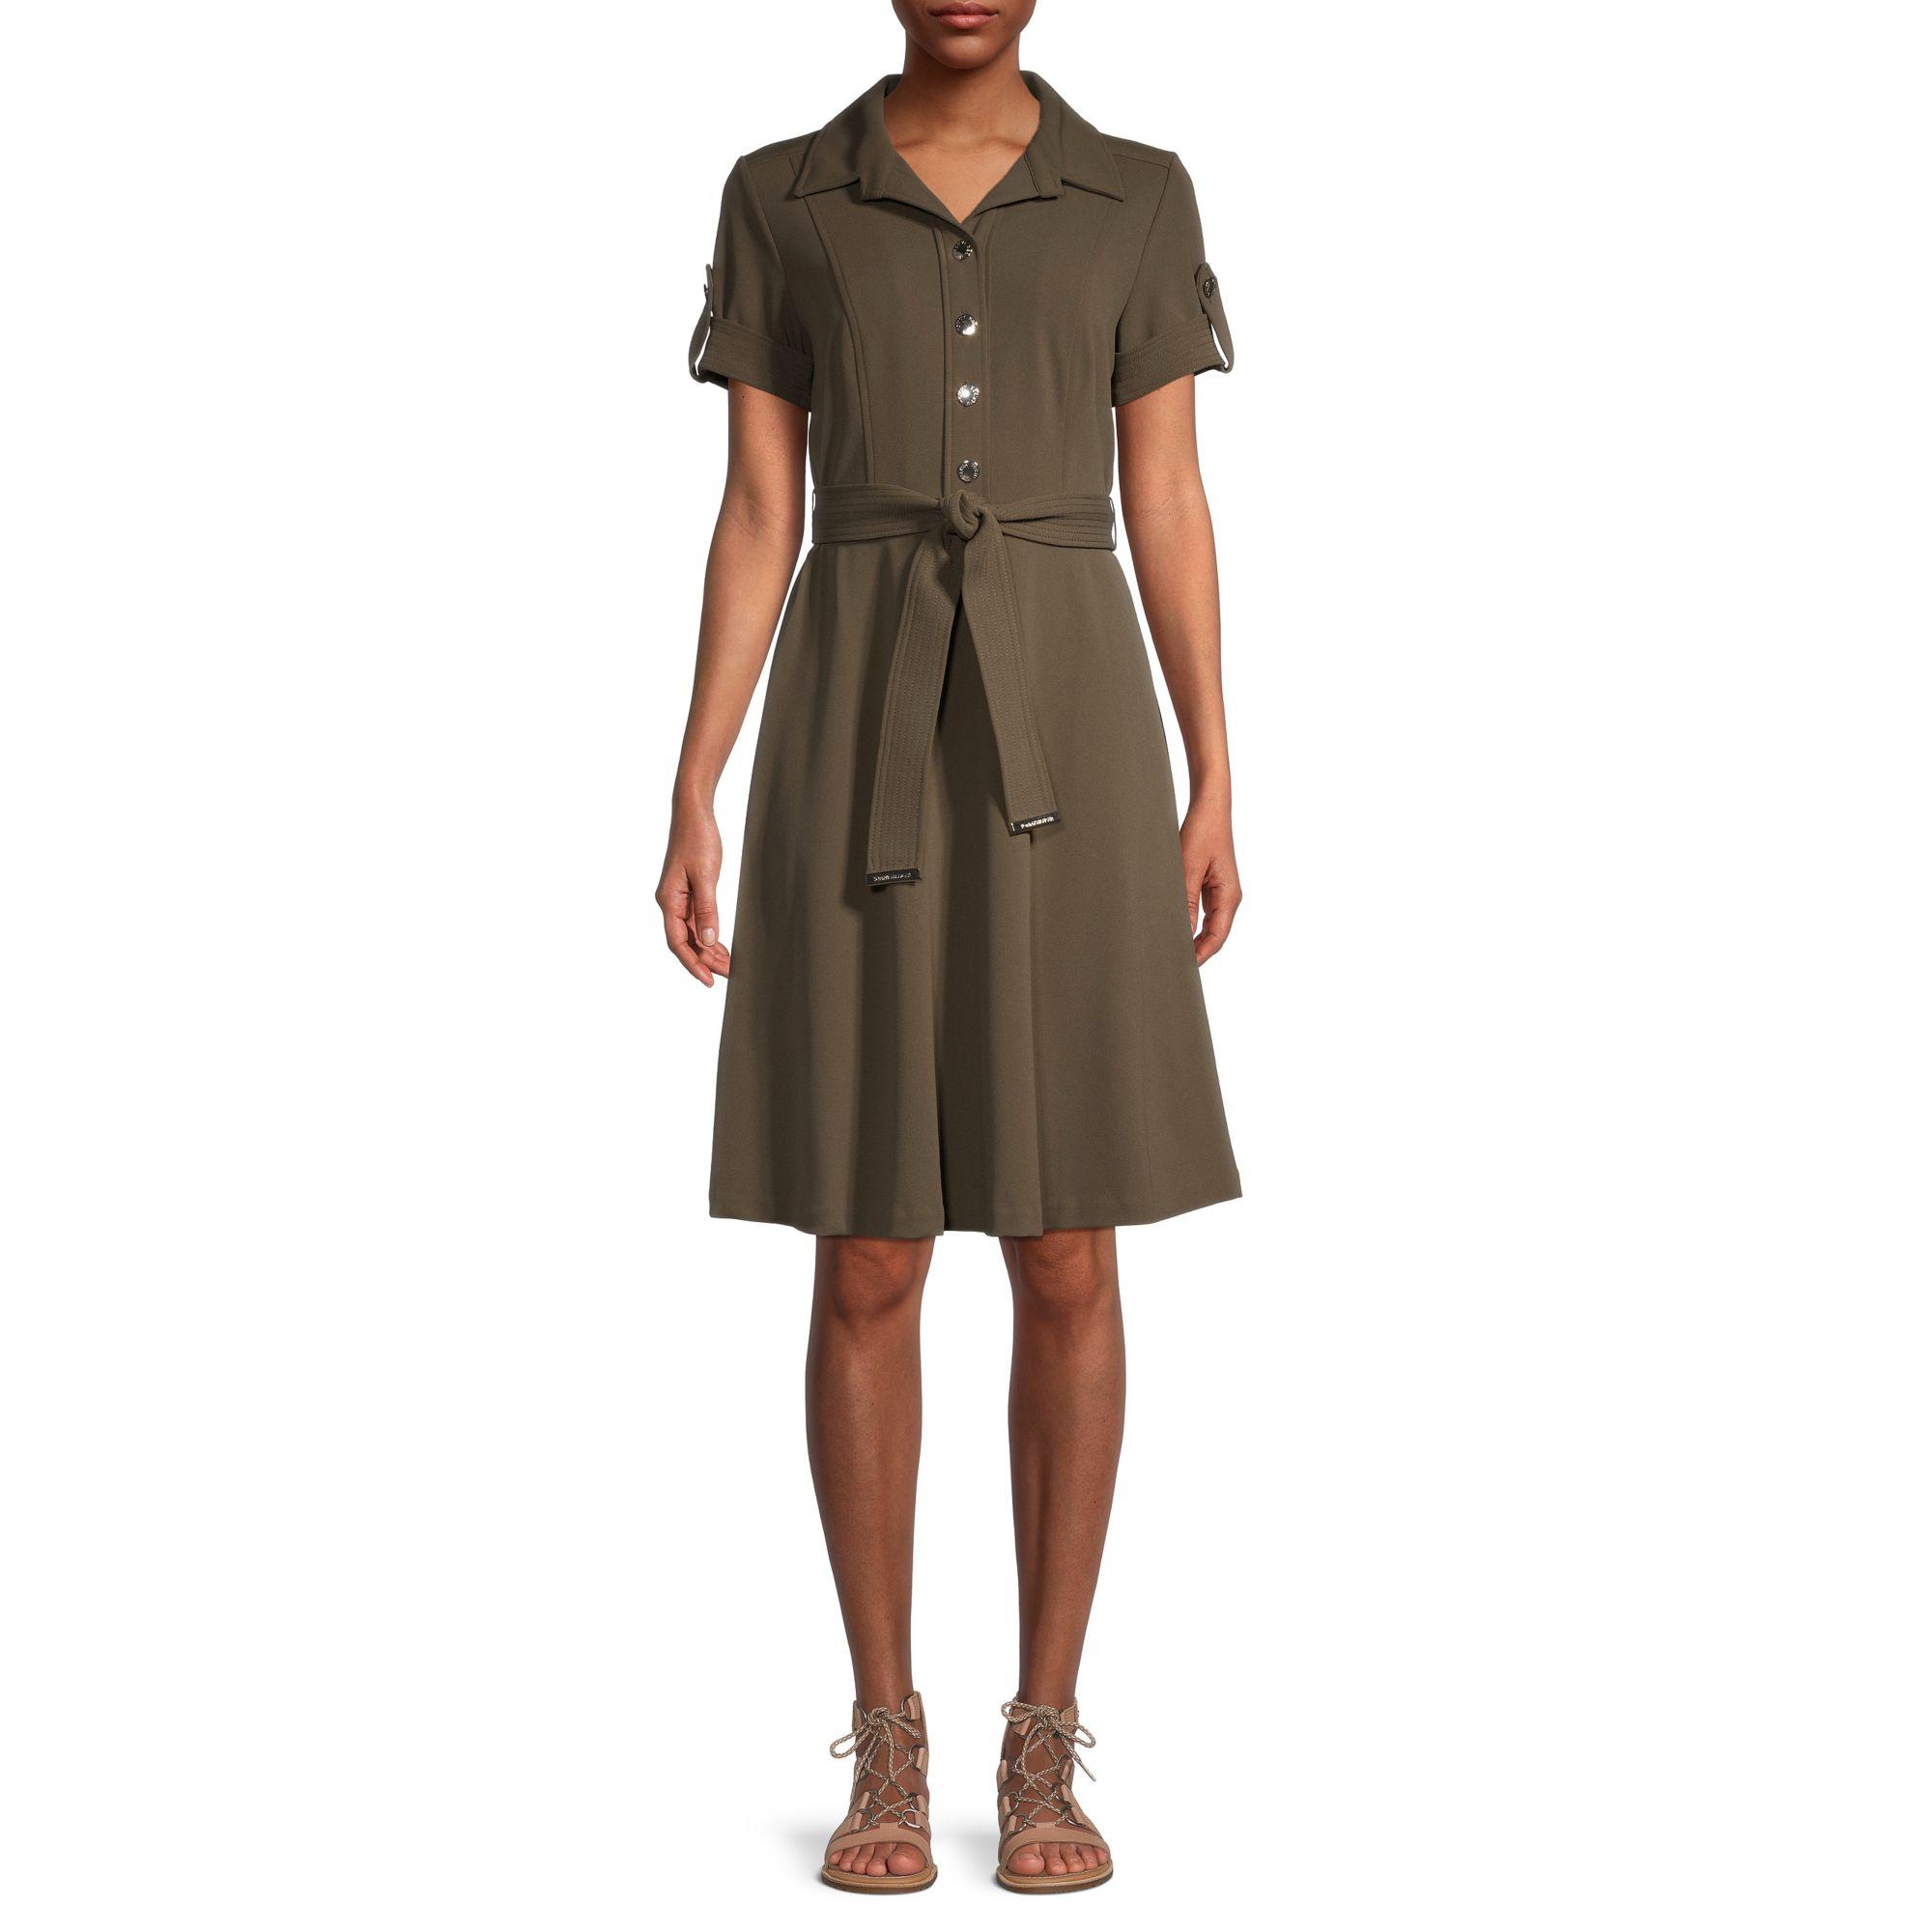 Tommy Hilfiger Synthetic Scuba Crepe Shirtdress in Olive (Green) - Lyst